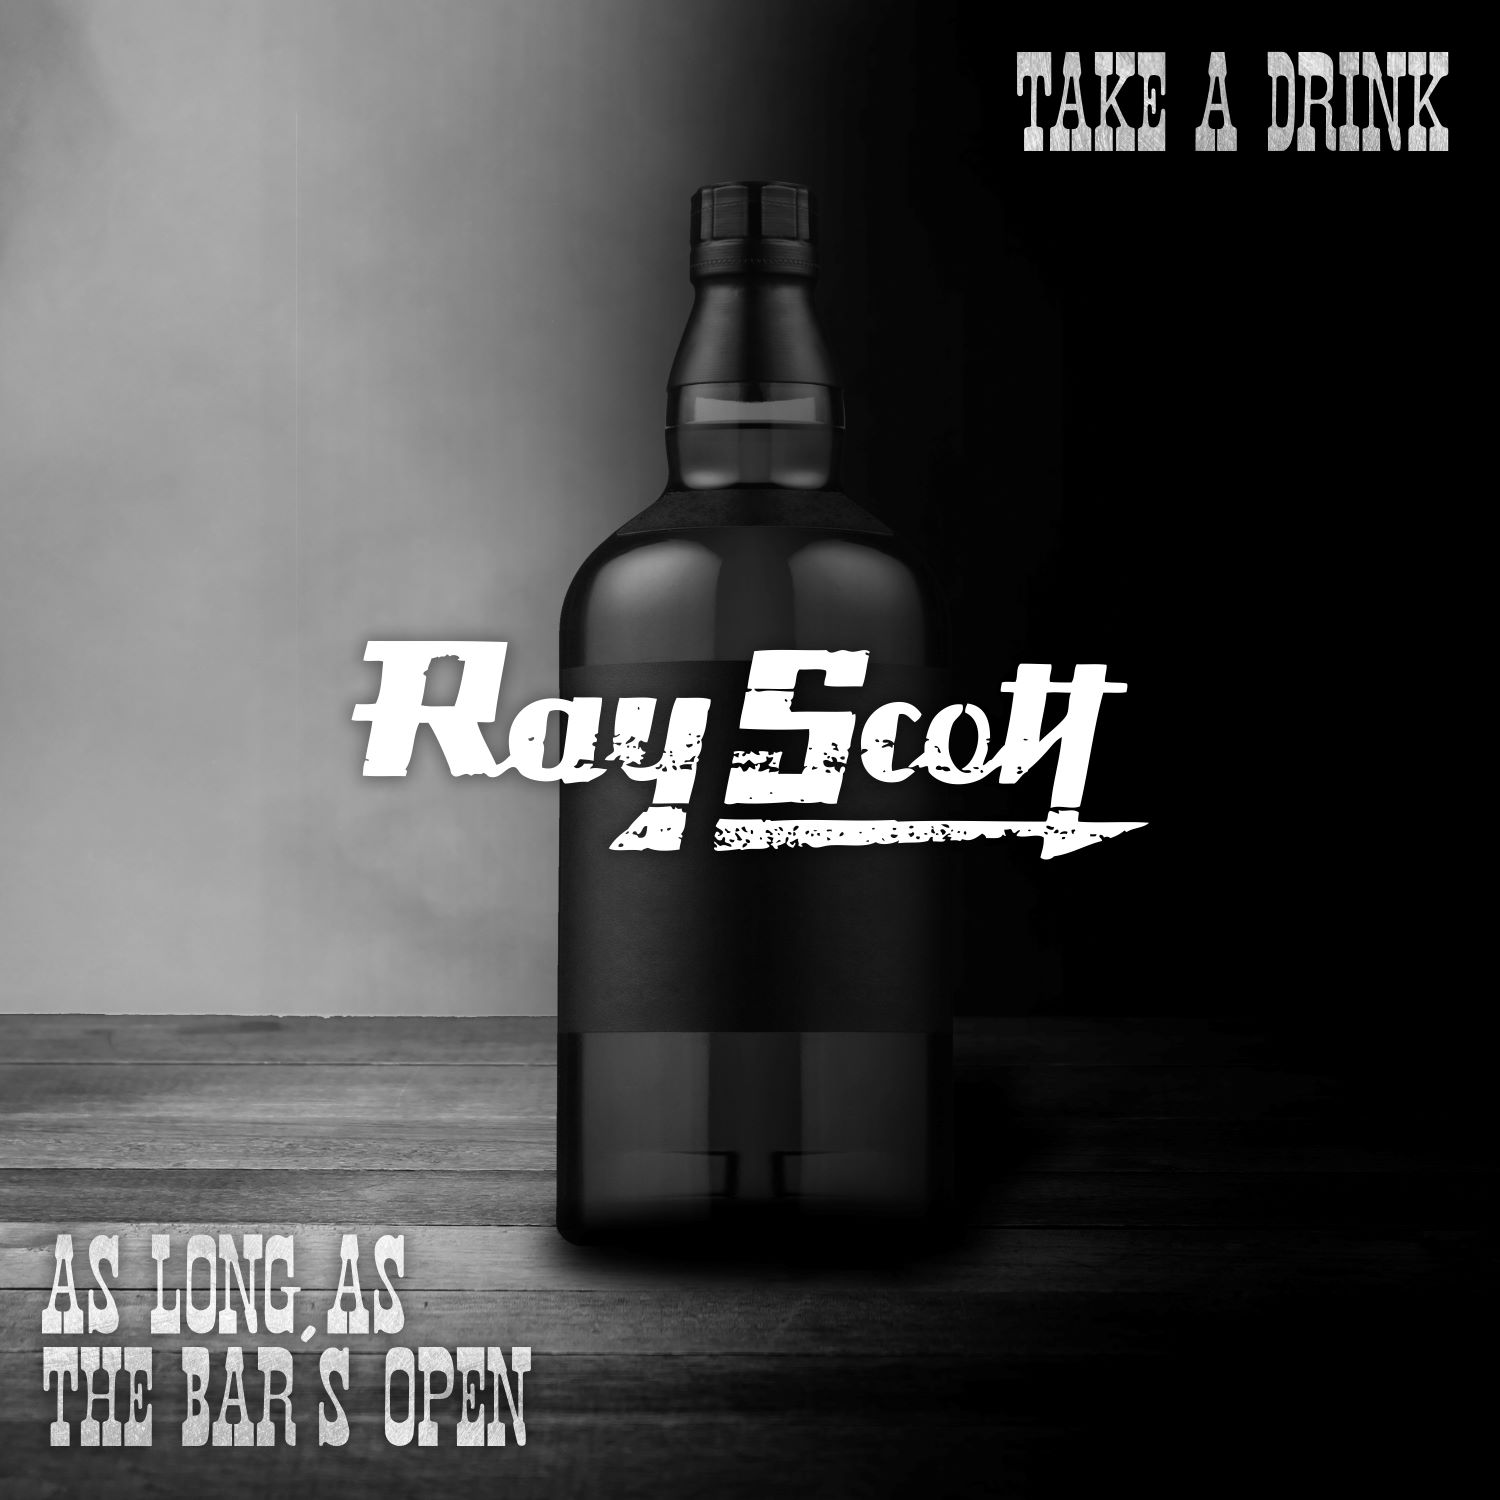 Ray Scott - "Take A Drink/As Long As The Bar's Open" Album Cover